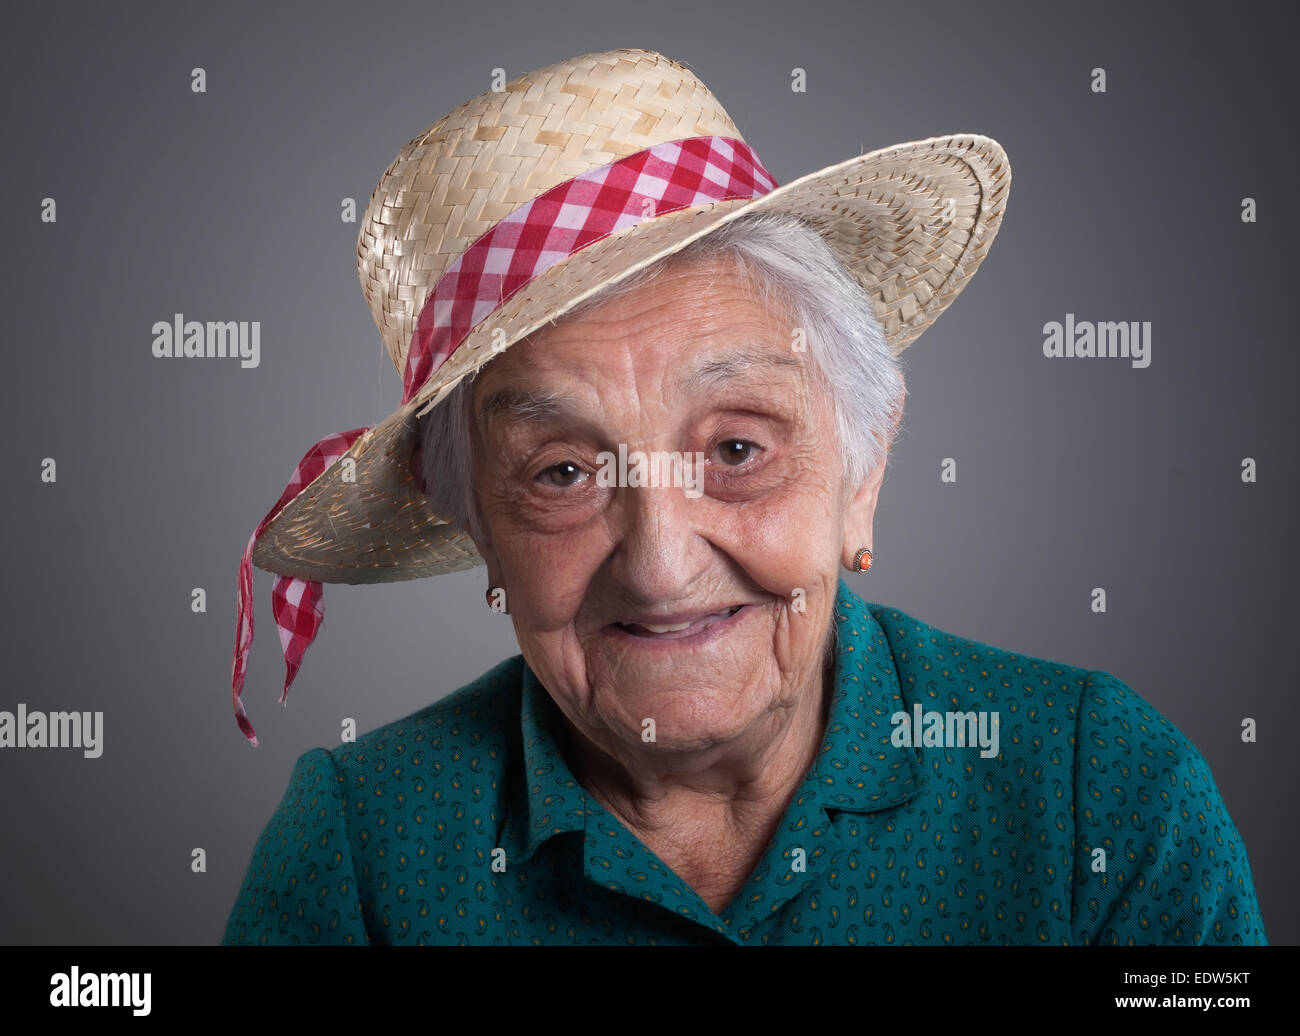 Elderly woman smiling with a hat in her head. Stock Photo